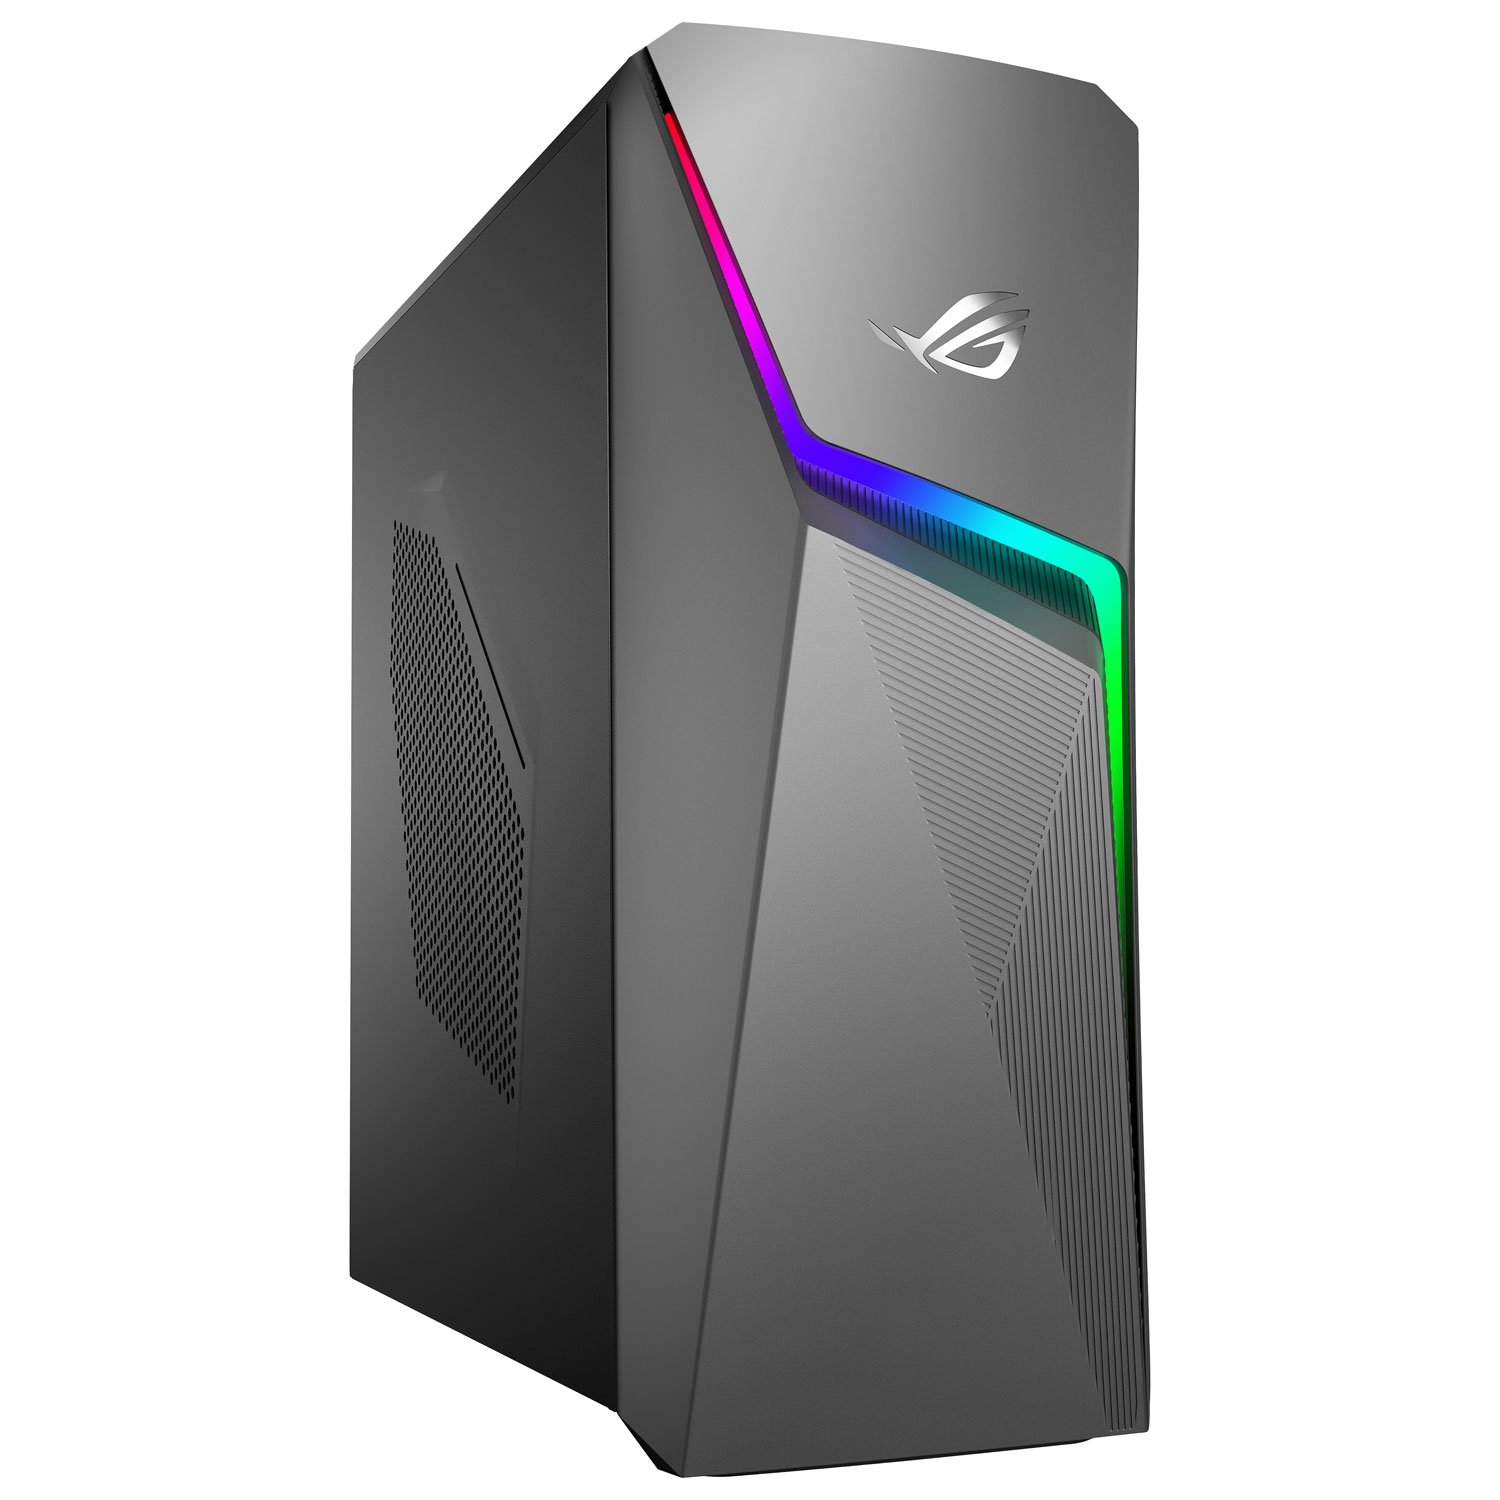 ASUS ROG Strix G10CE Gaming PC - Grey (Intel Core i5-11400F/512GB SSD/12GB RAM/GTX 1650) - Only at Best Buy